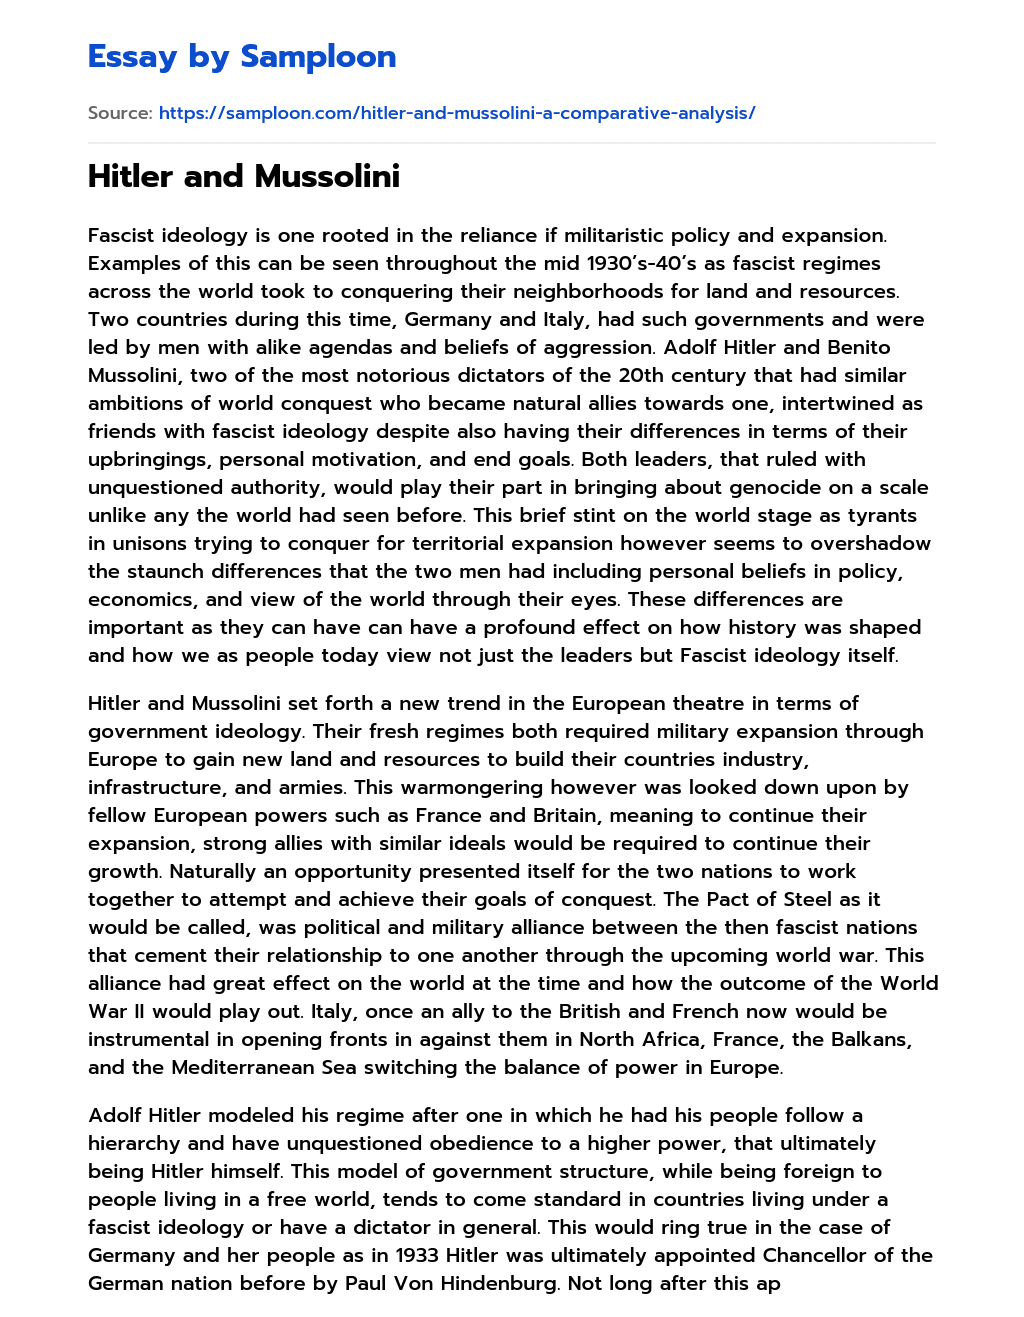 Hitler and Mussolini essay